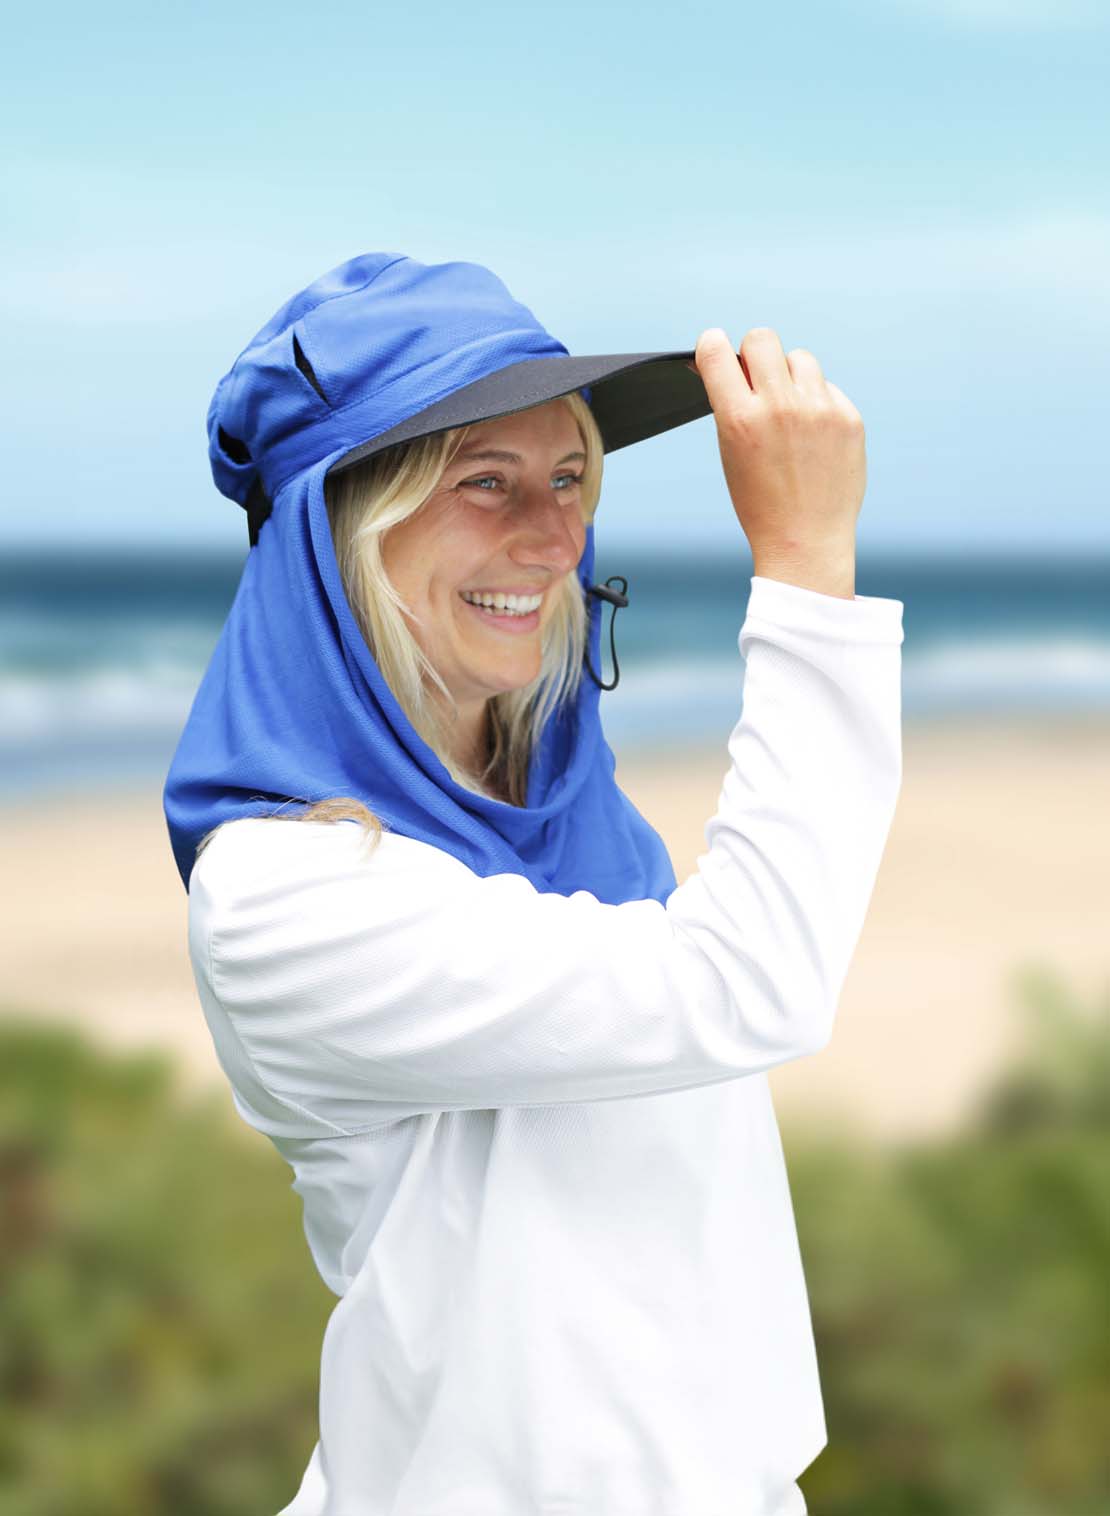 Sun Protection Australia makes the highest quality UPF50+ clothing